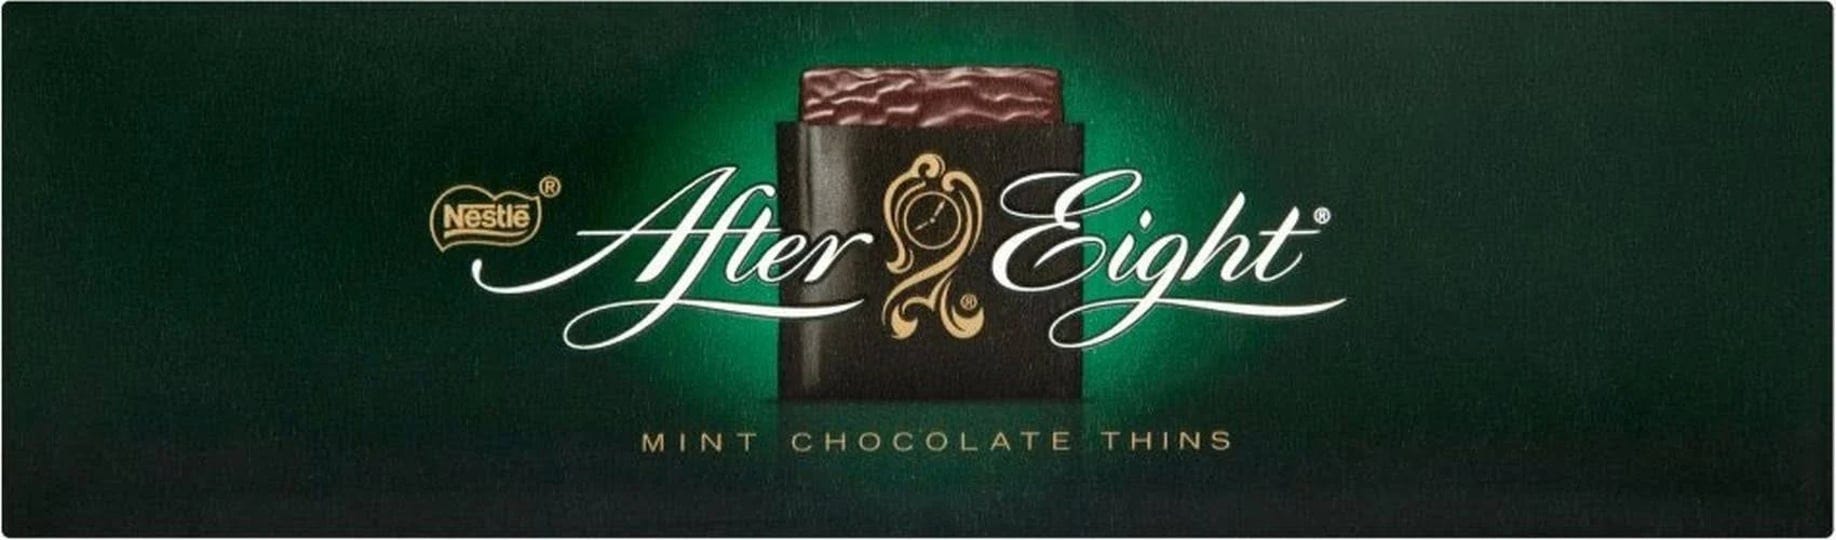 nestle-after-eight-chocolate-mints-300g-pack-1